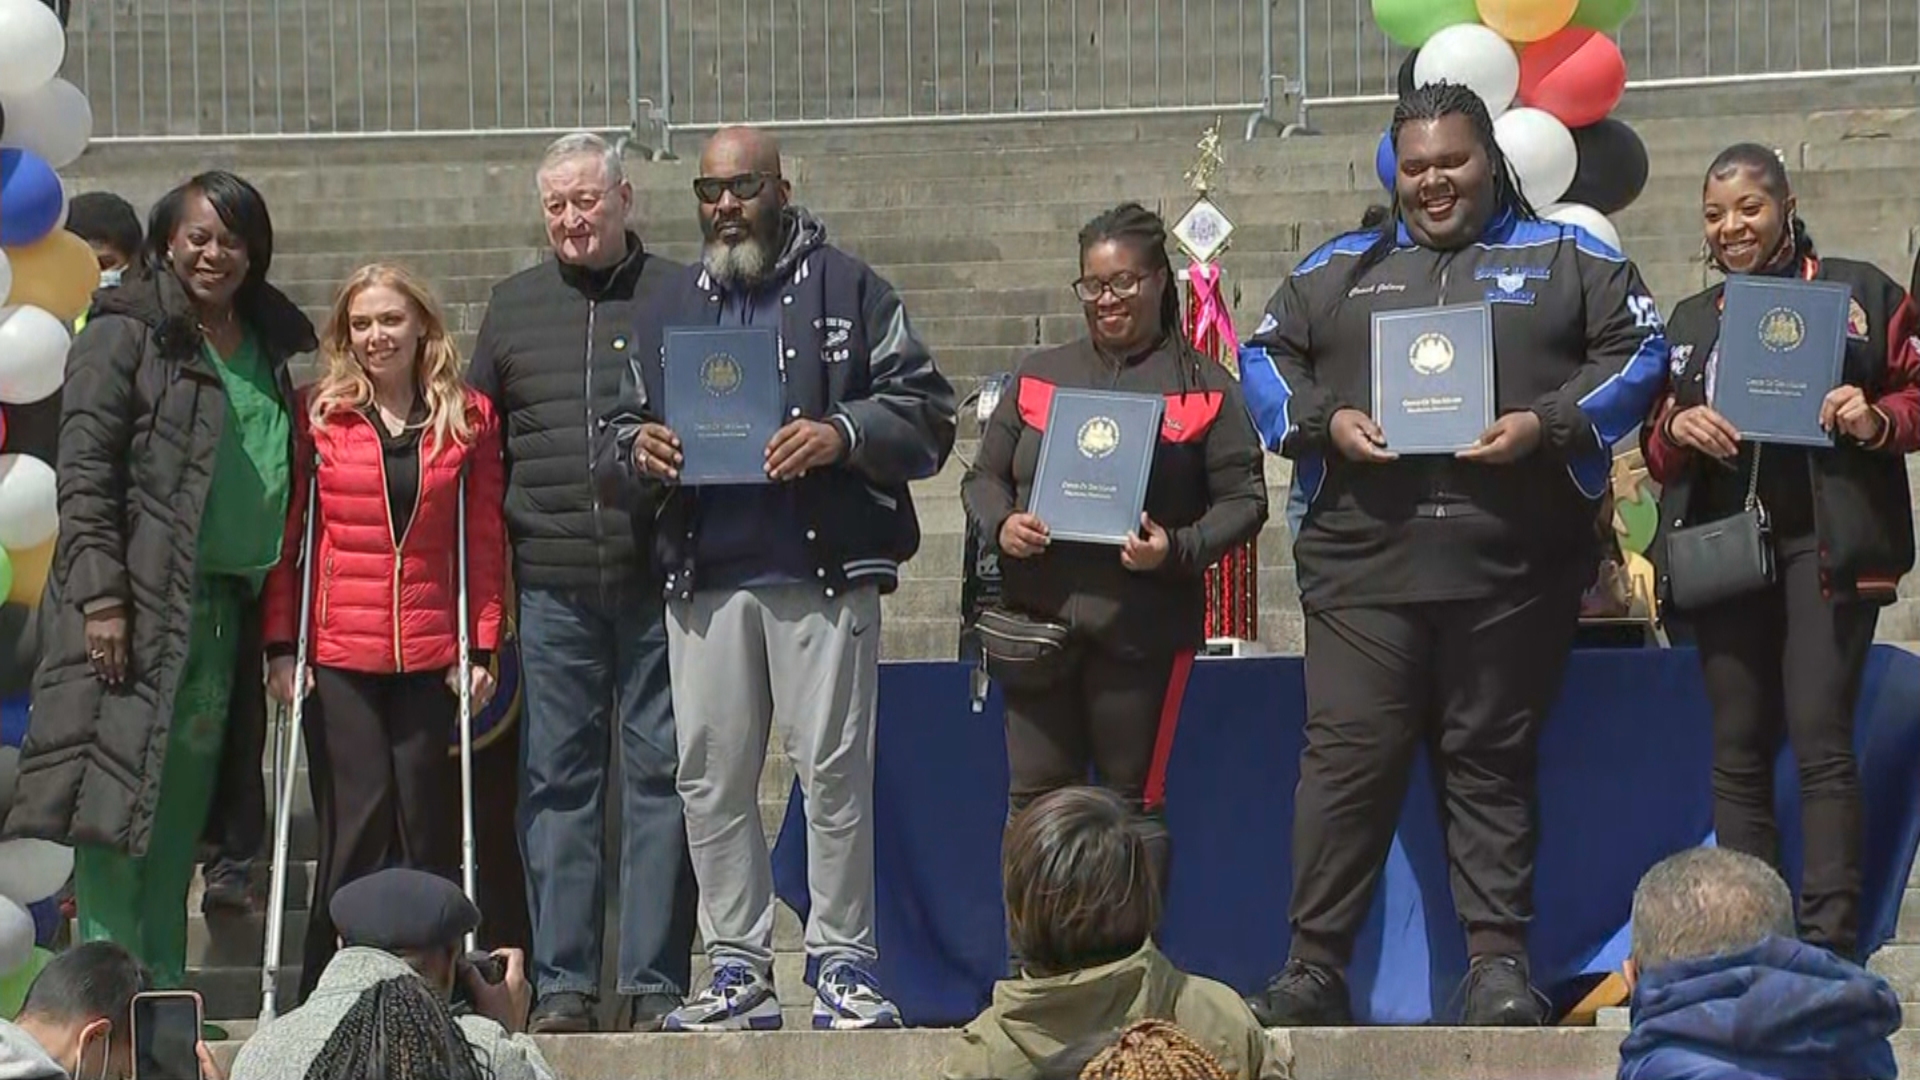 5 Philadelphia Youth Teams Honored For Winning National Titles In Football, Cheer Along The Parkway: 'It Was An Amazing Experience'